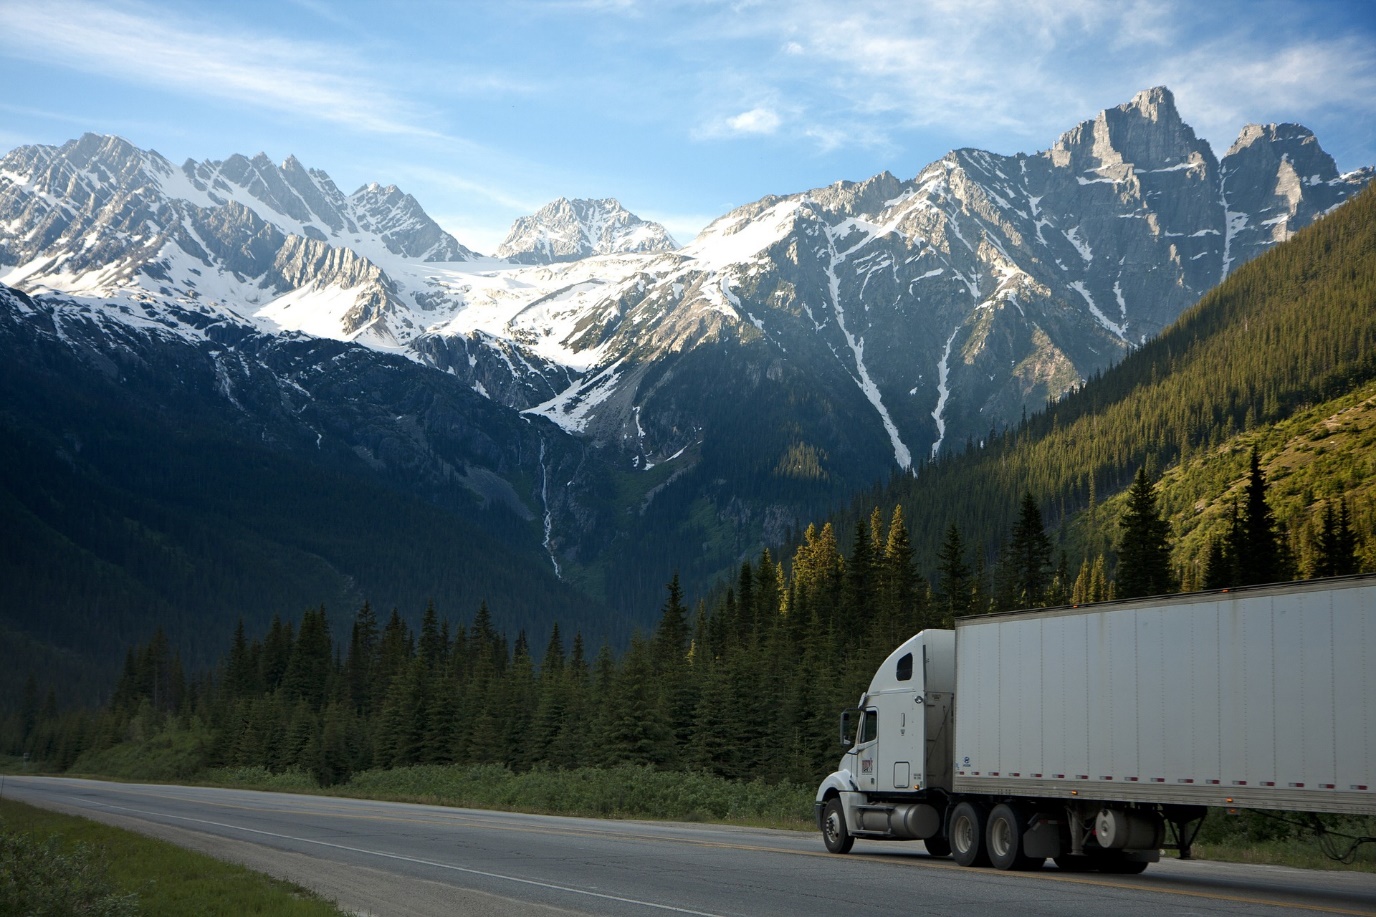 Over The Road (OTR) Trucking: What It Is & Job Requirements